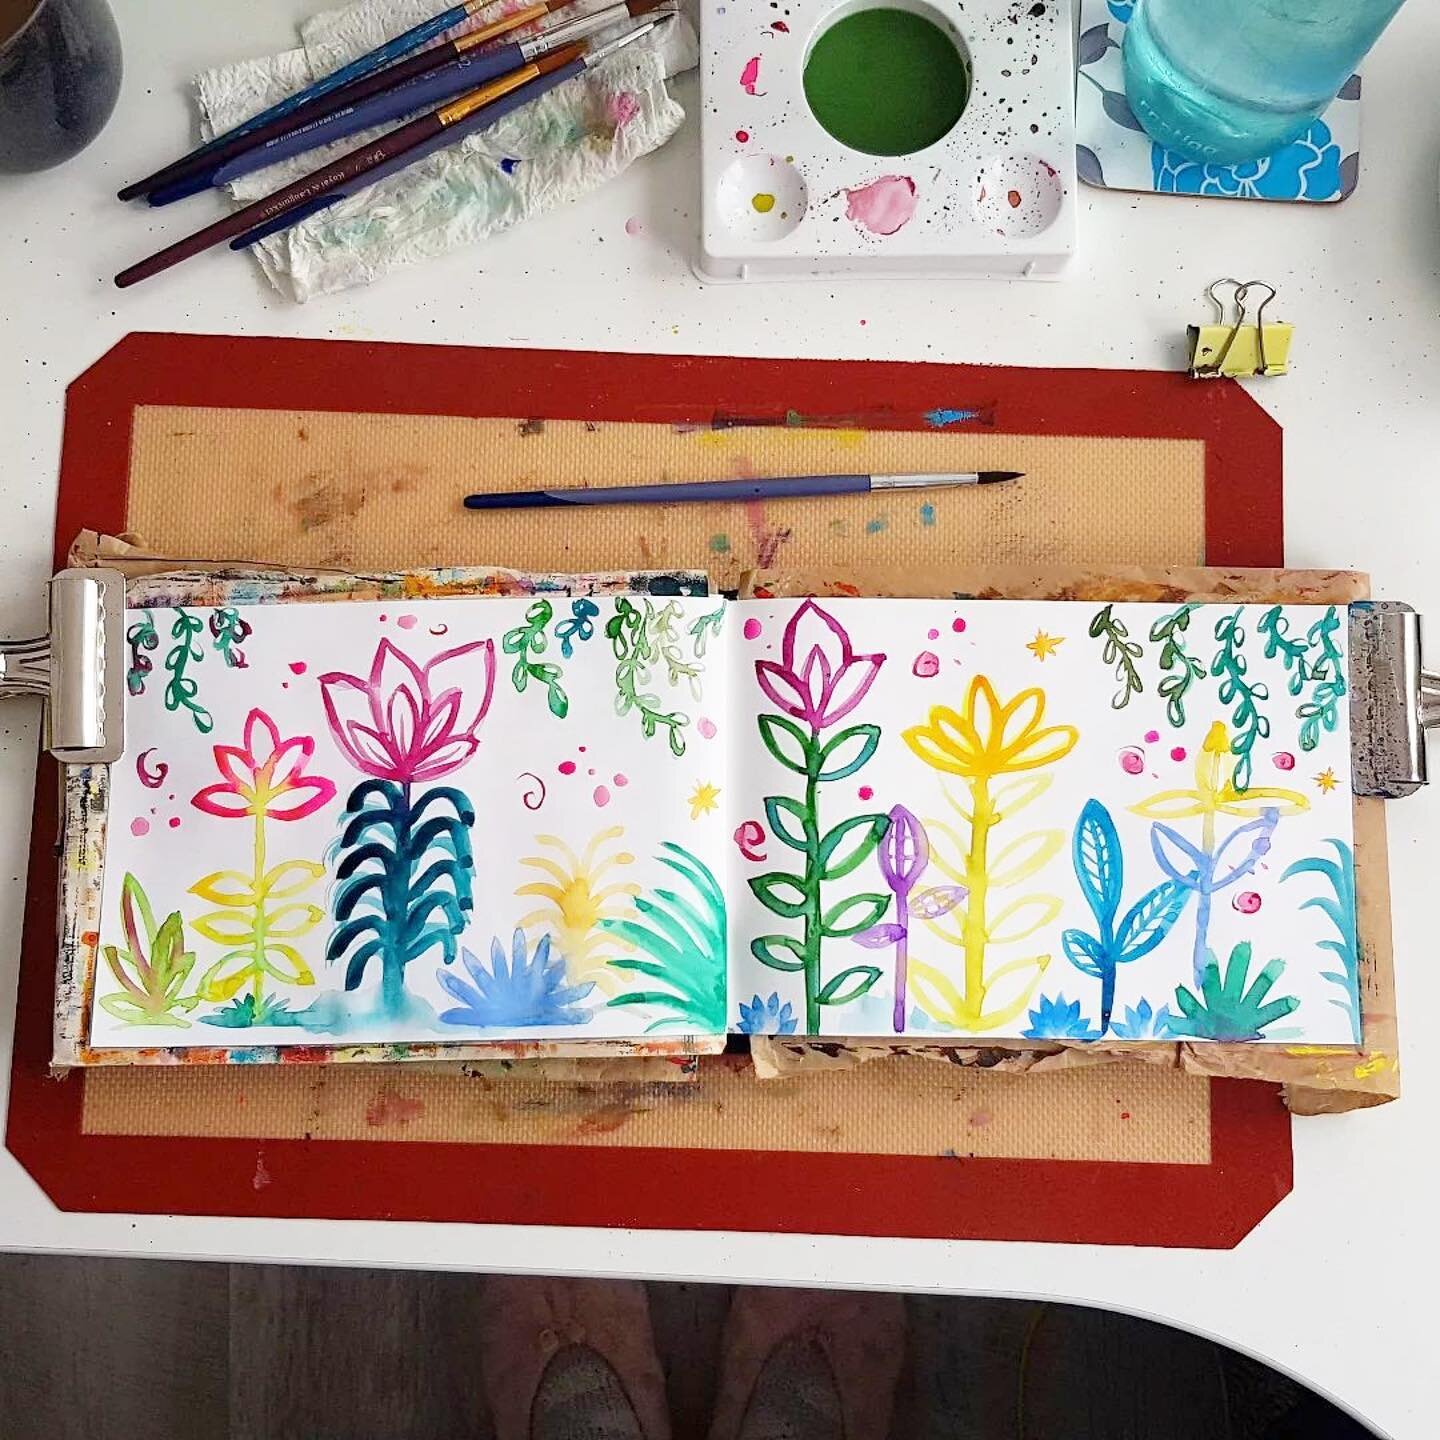 We have been swooning over the flowers happening in our #wonderfulwatercolorreset challenge, including these by @r_march_art
・・・
Day 1 #wonderfulwatercolorreset  surreal playing with these on a snowy day here but a pop of colour does wonders too 🎨